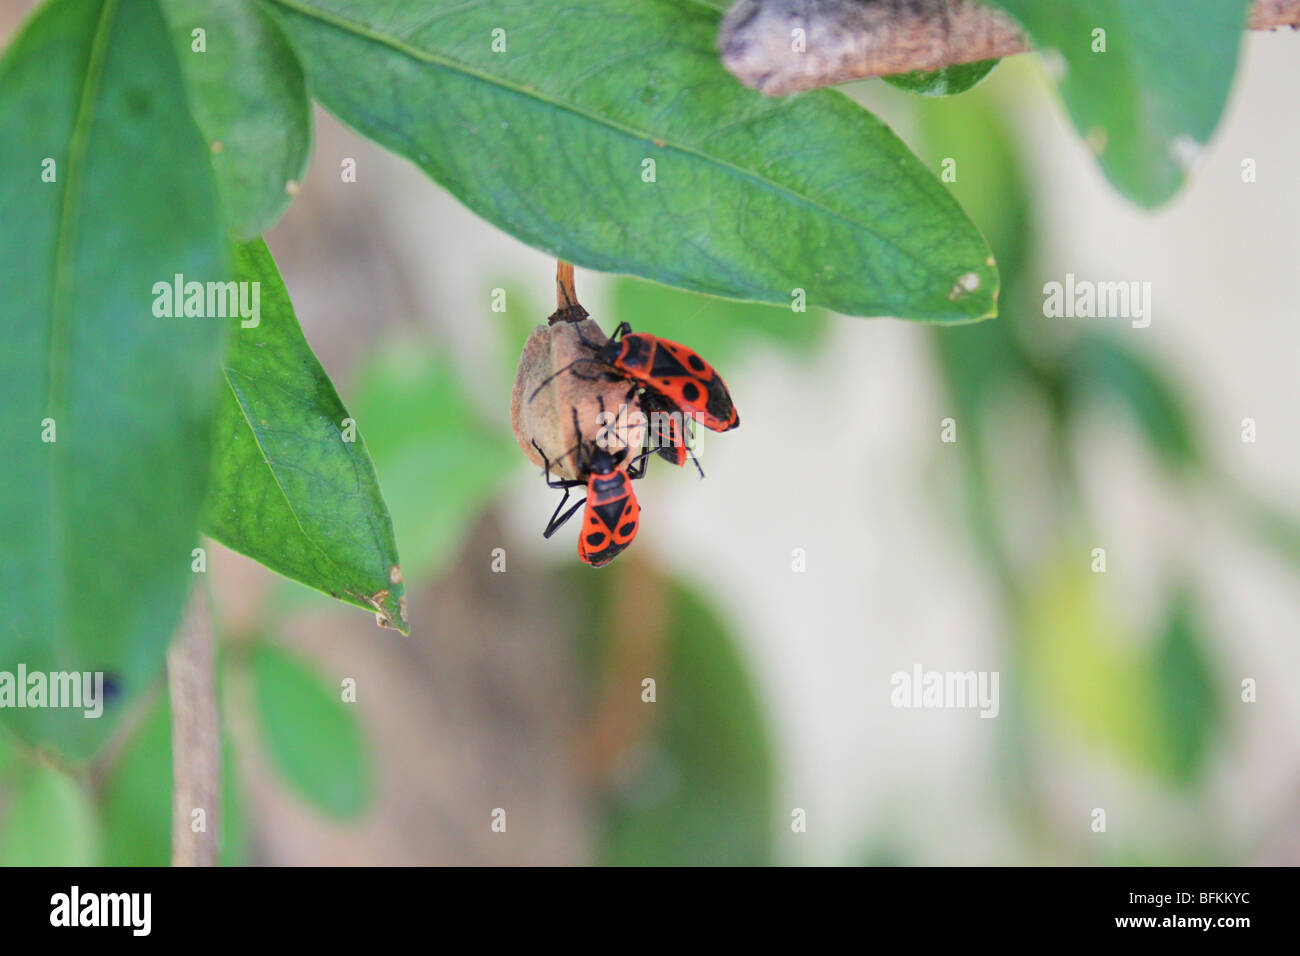 Gendarme or firebug often seen mating or eating plant seeds, Lascours, Languedoc, France Stock Photo